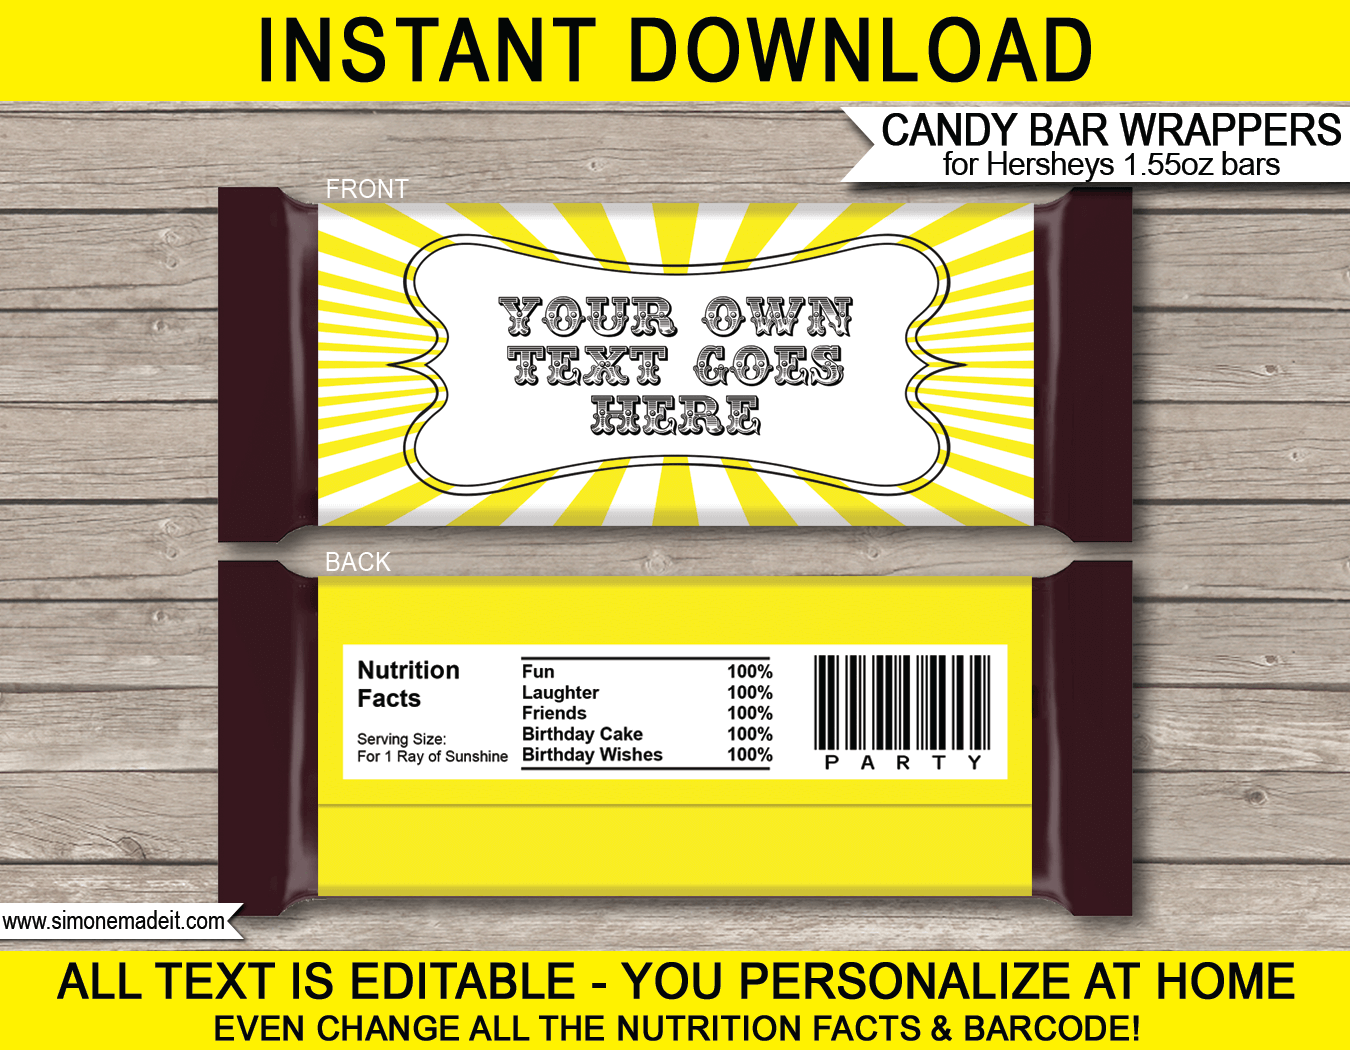 Sunshine Hershey Candy Bar Wrappers | Birthday Party Favors | Personalized Candy Bars | Editable Template | INSTANT DOWNLOAD $3.00 via simonemadeit.com